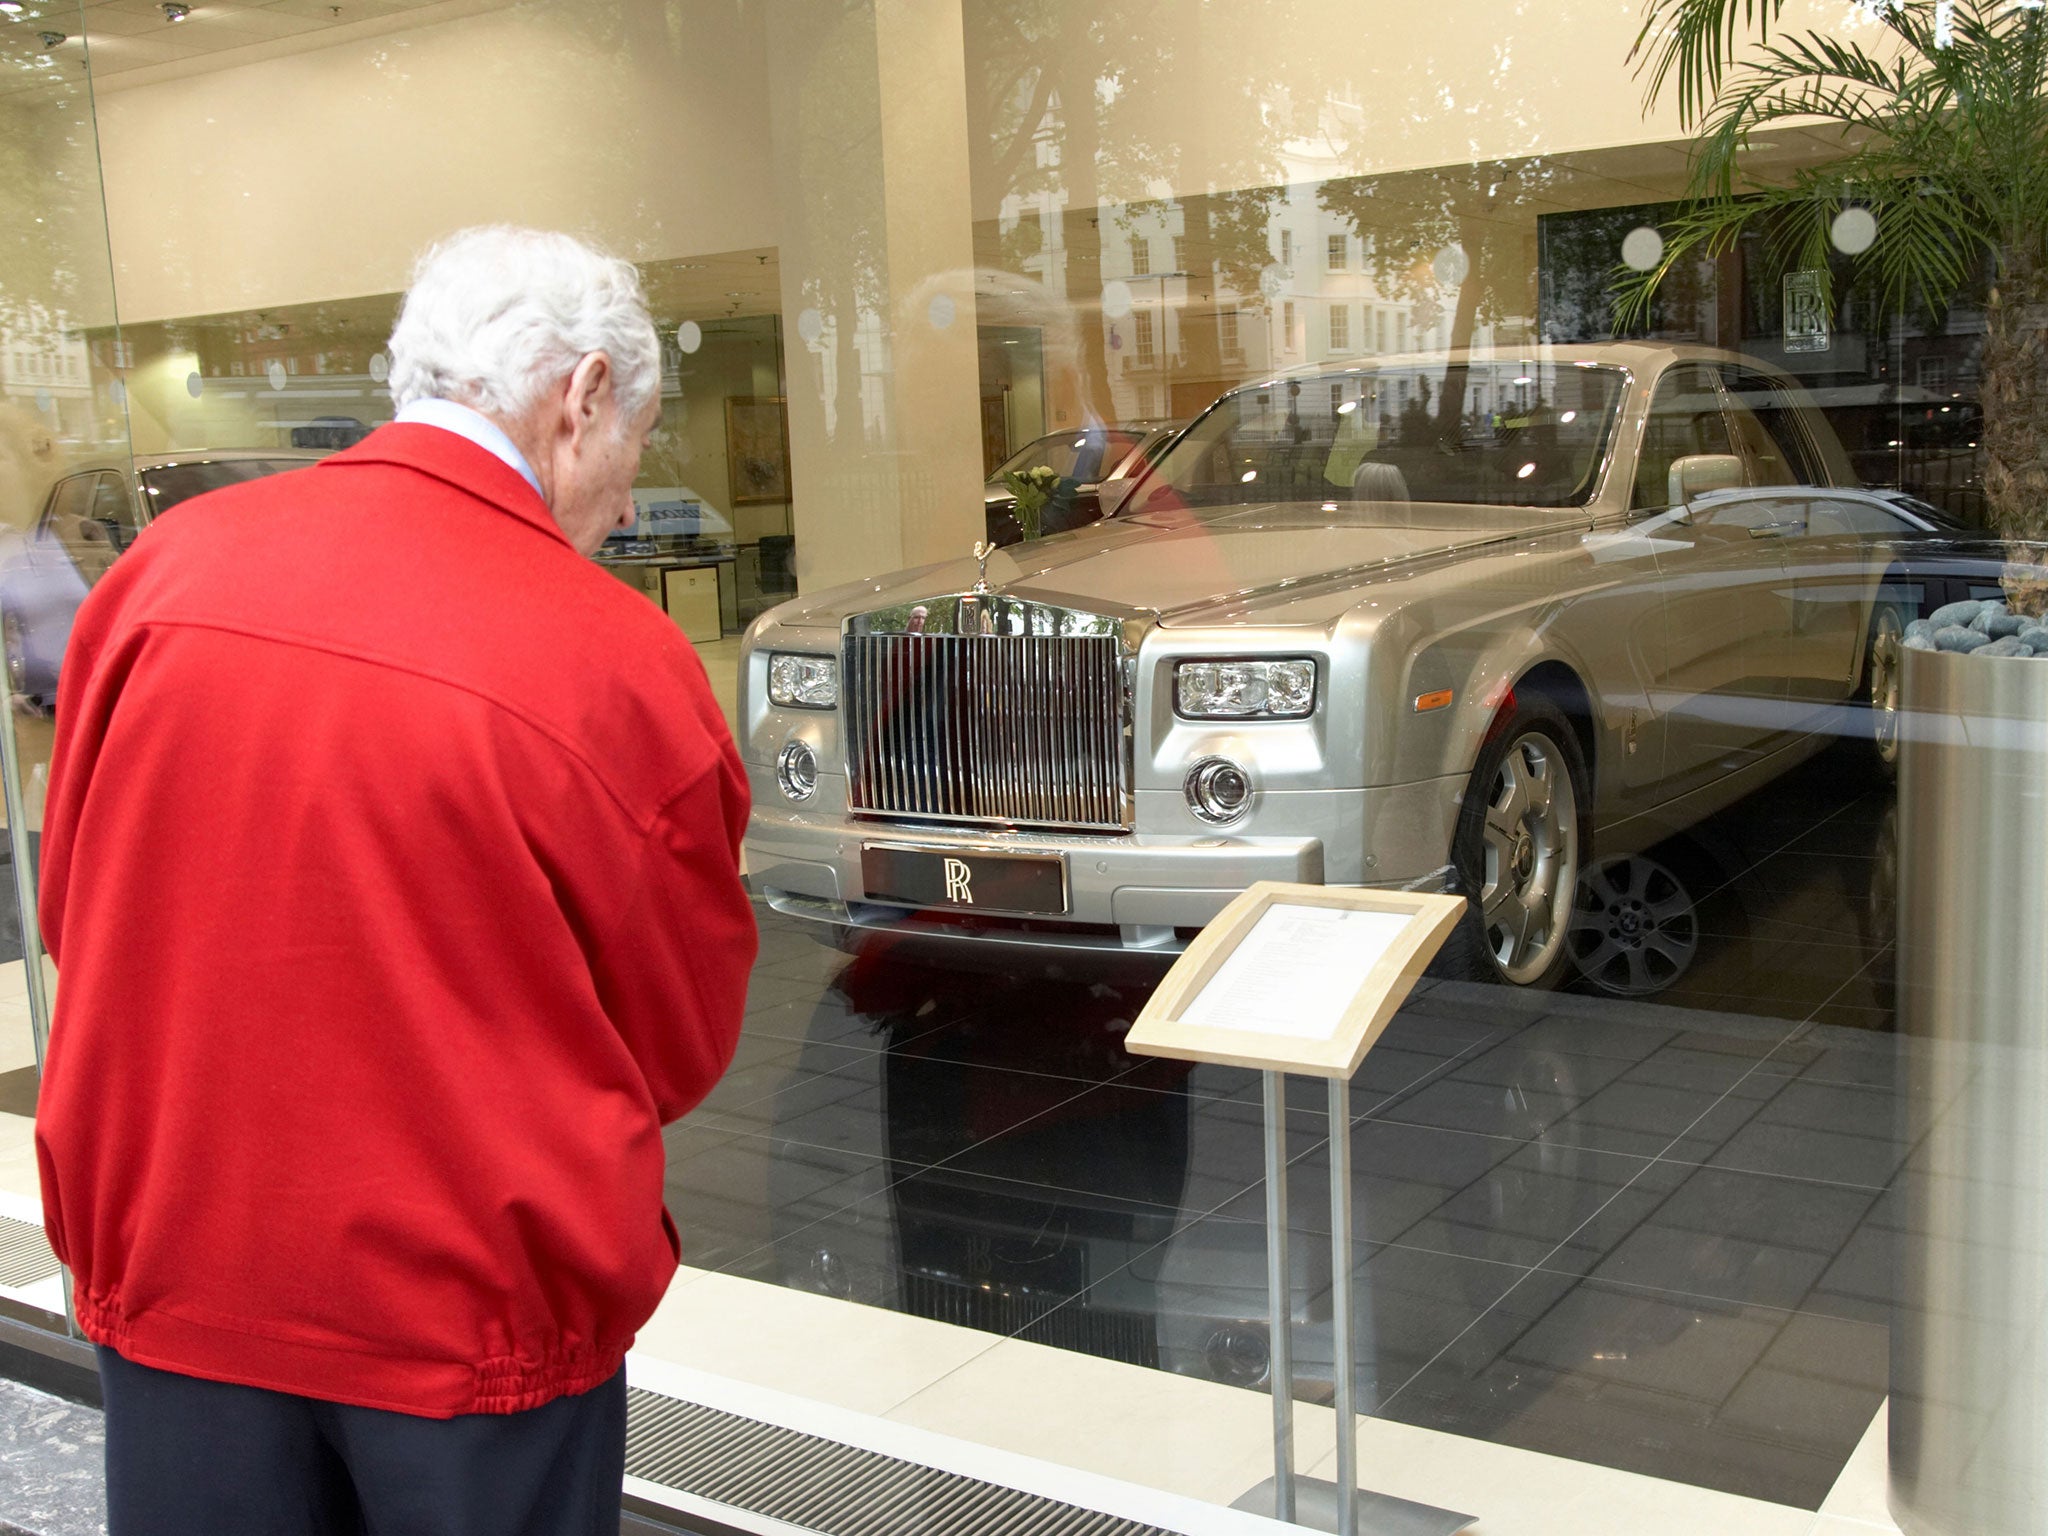 There won’t be that many pensioners blowing their investment on luxury cars